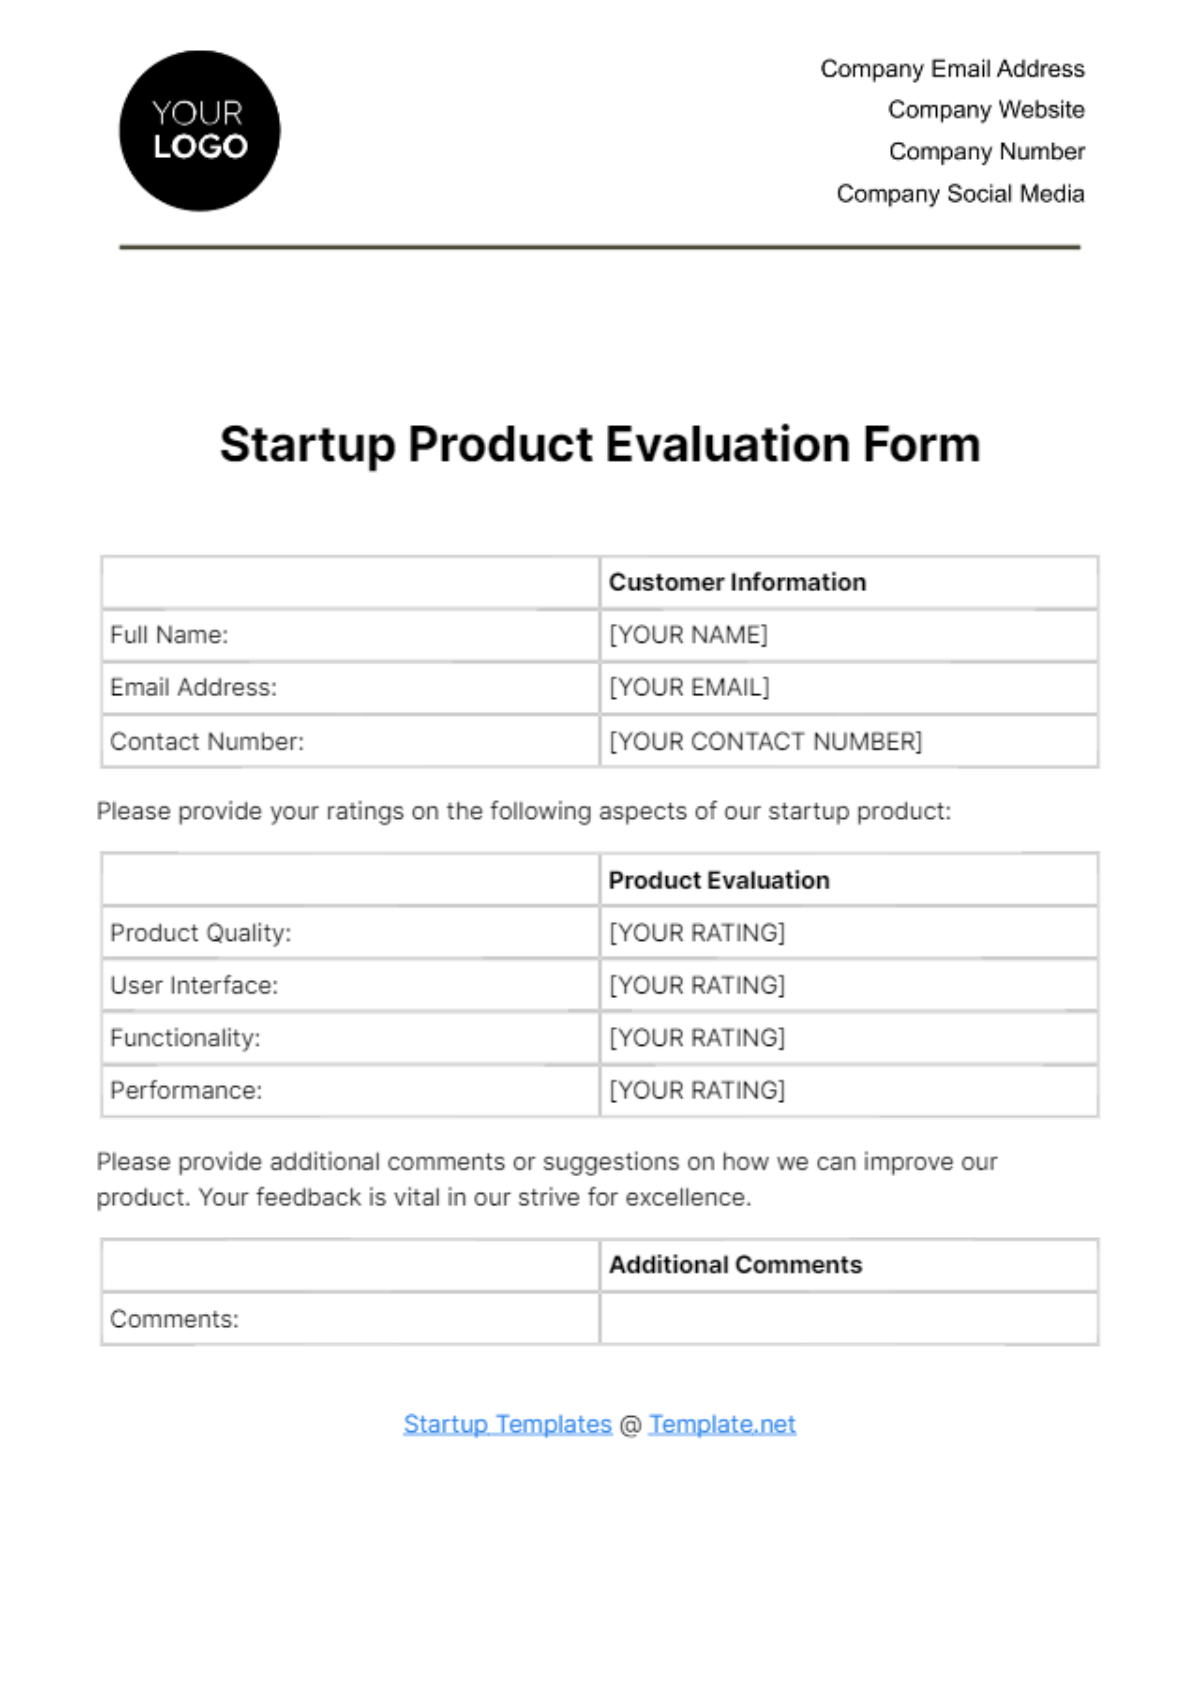 Startup Product Evaluation Form Template